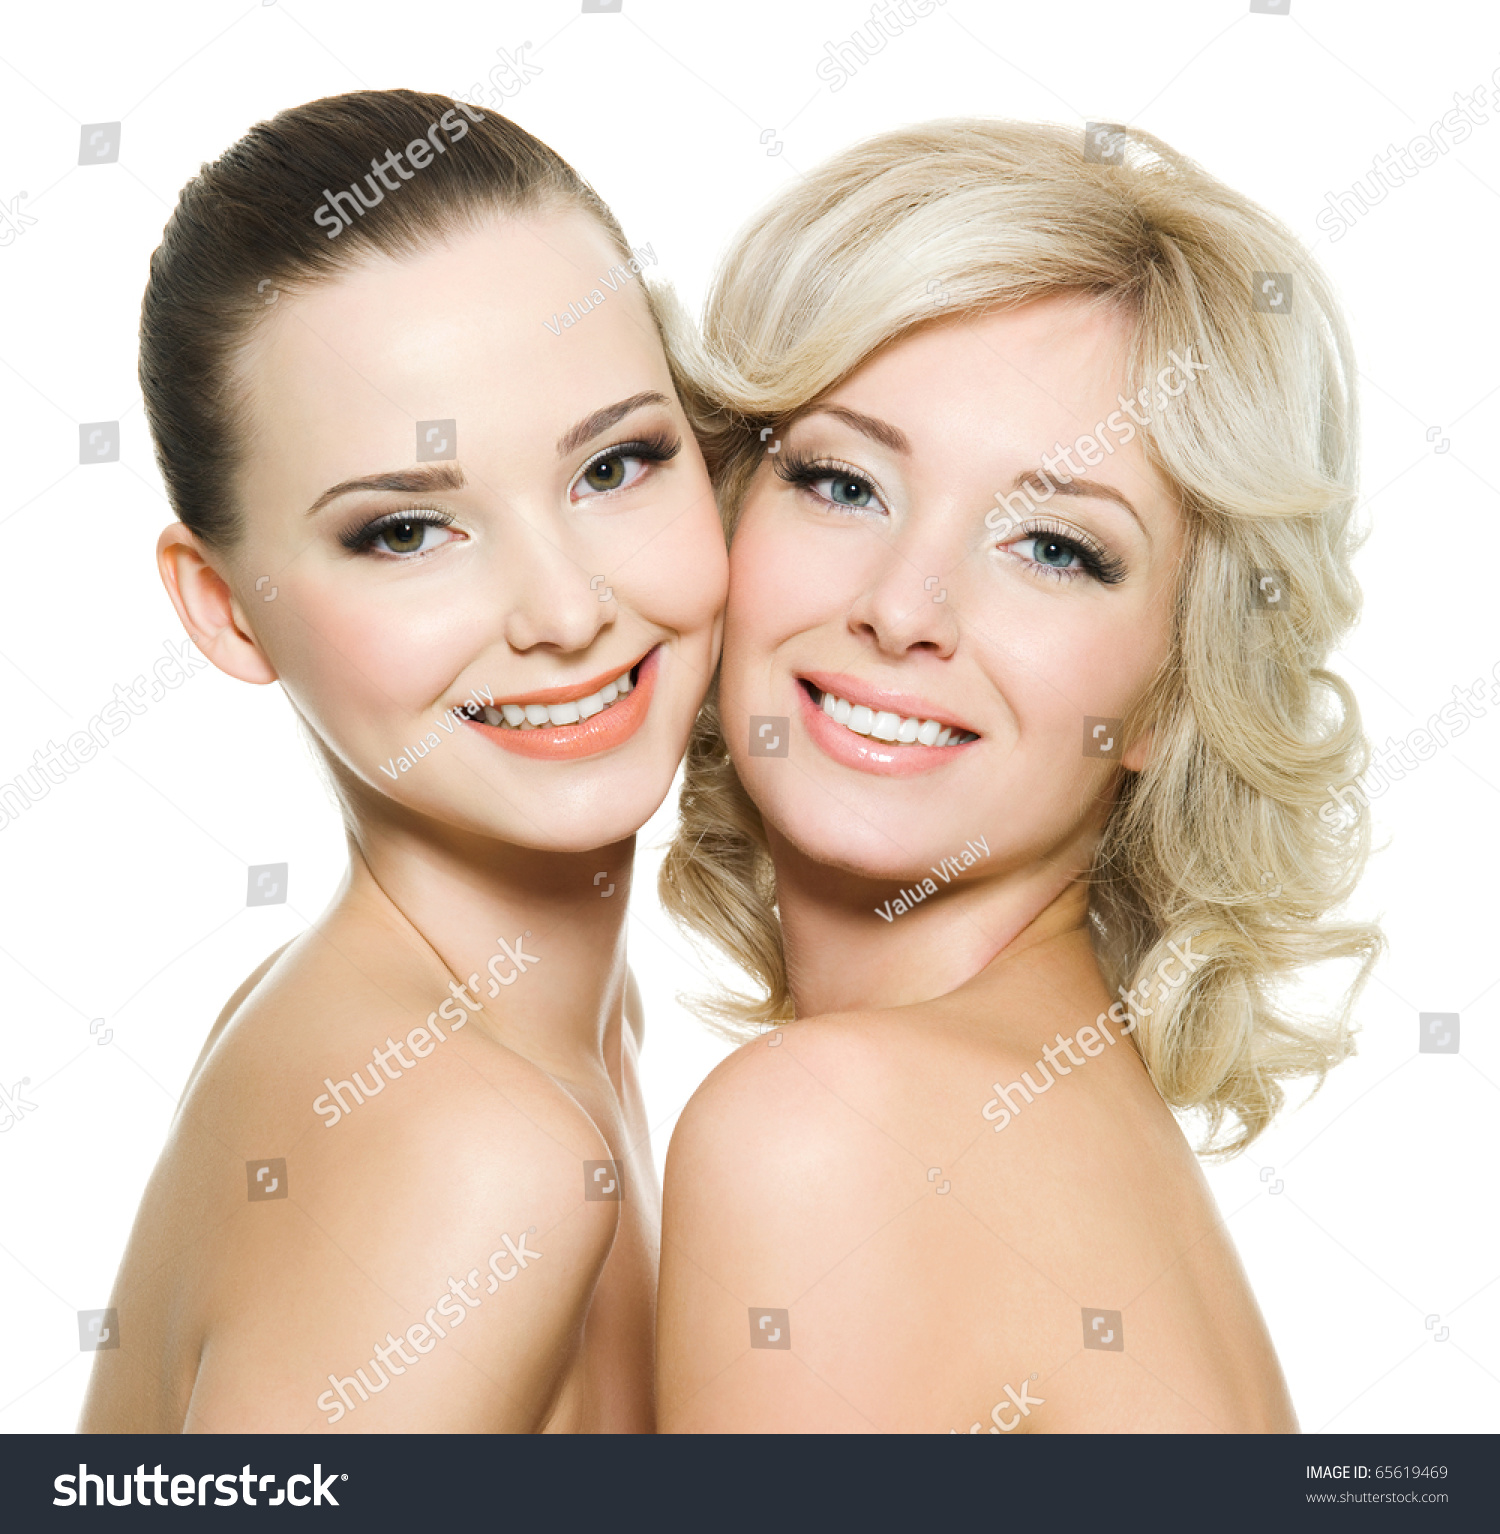 Two Happy Beautiful Women Posing Together Isolated On White Stock Photo Shutterstock